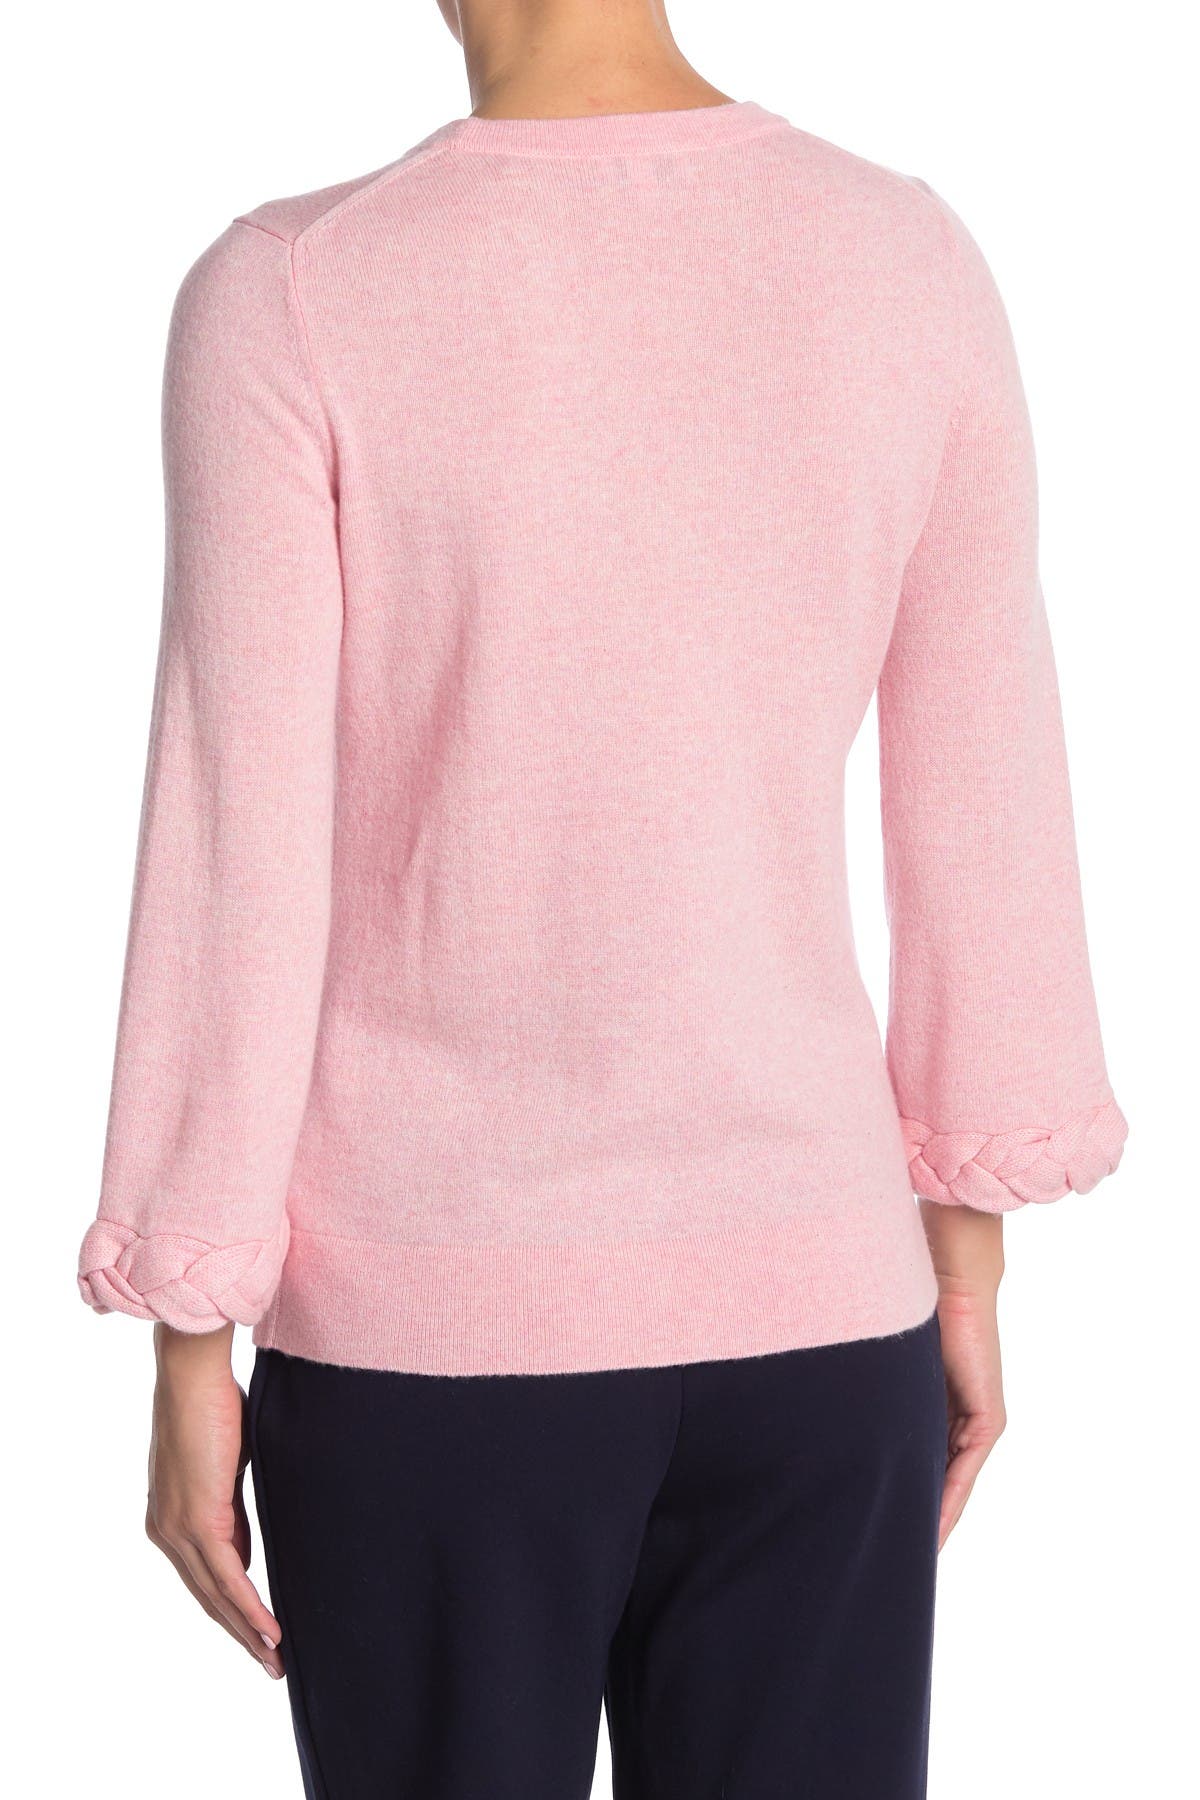 Kinross Braided Cuff Cashmere Knit Sweater In Light/pastel Pink6